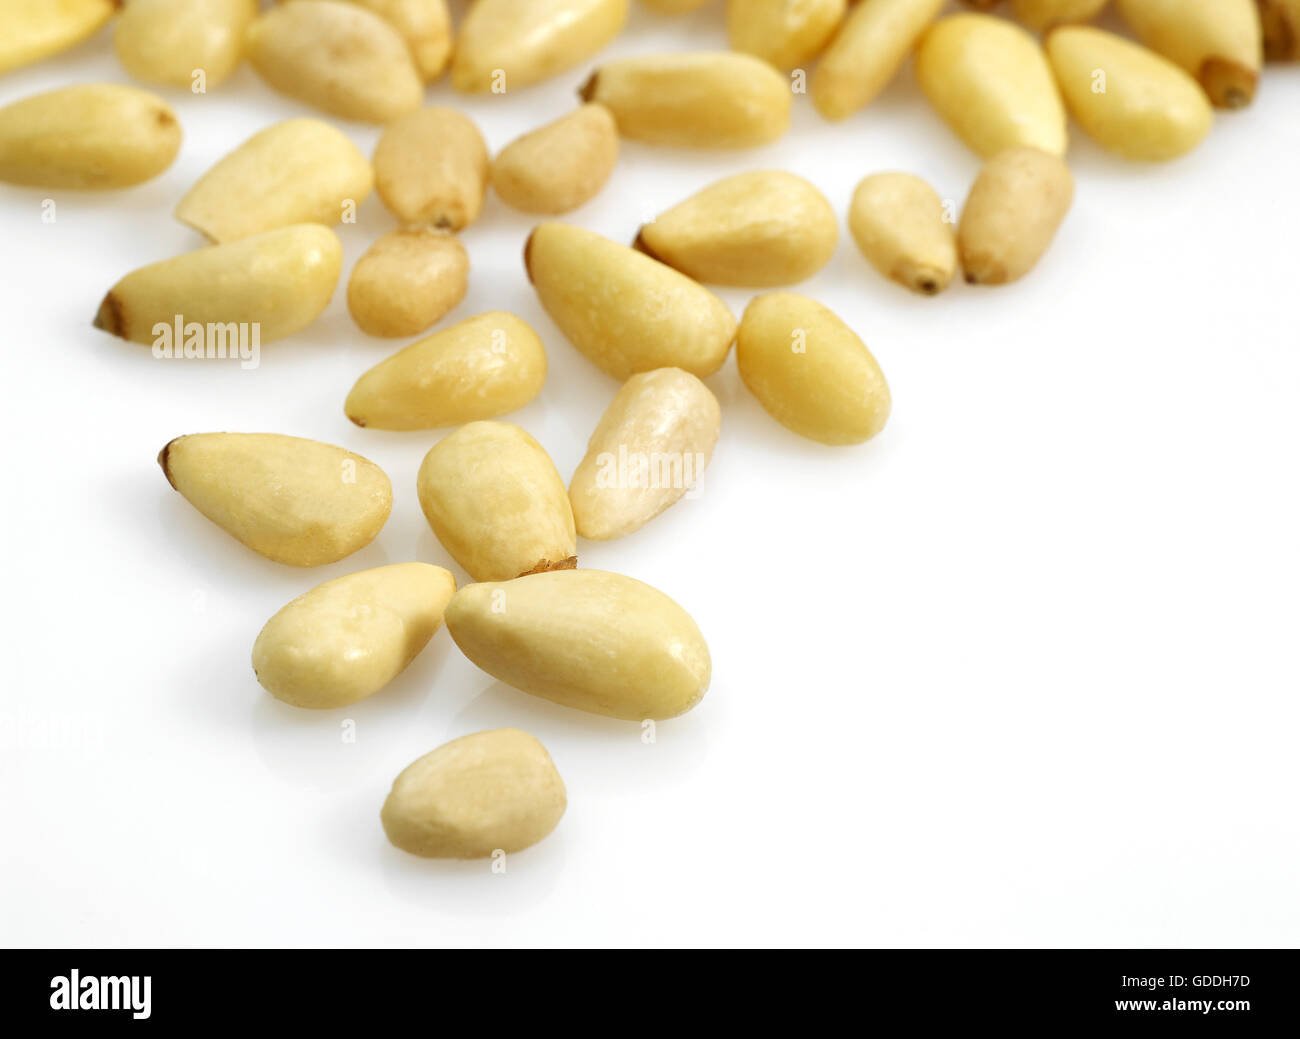 Pine Kernel or Pine Nut, pinus sp., Fruits against White Background Stock Photo